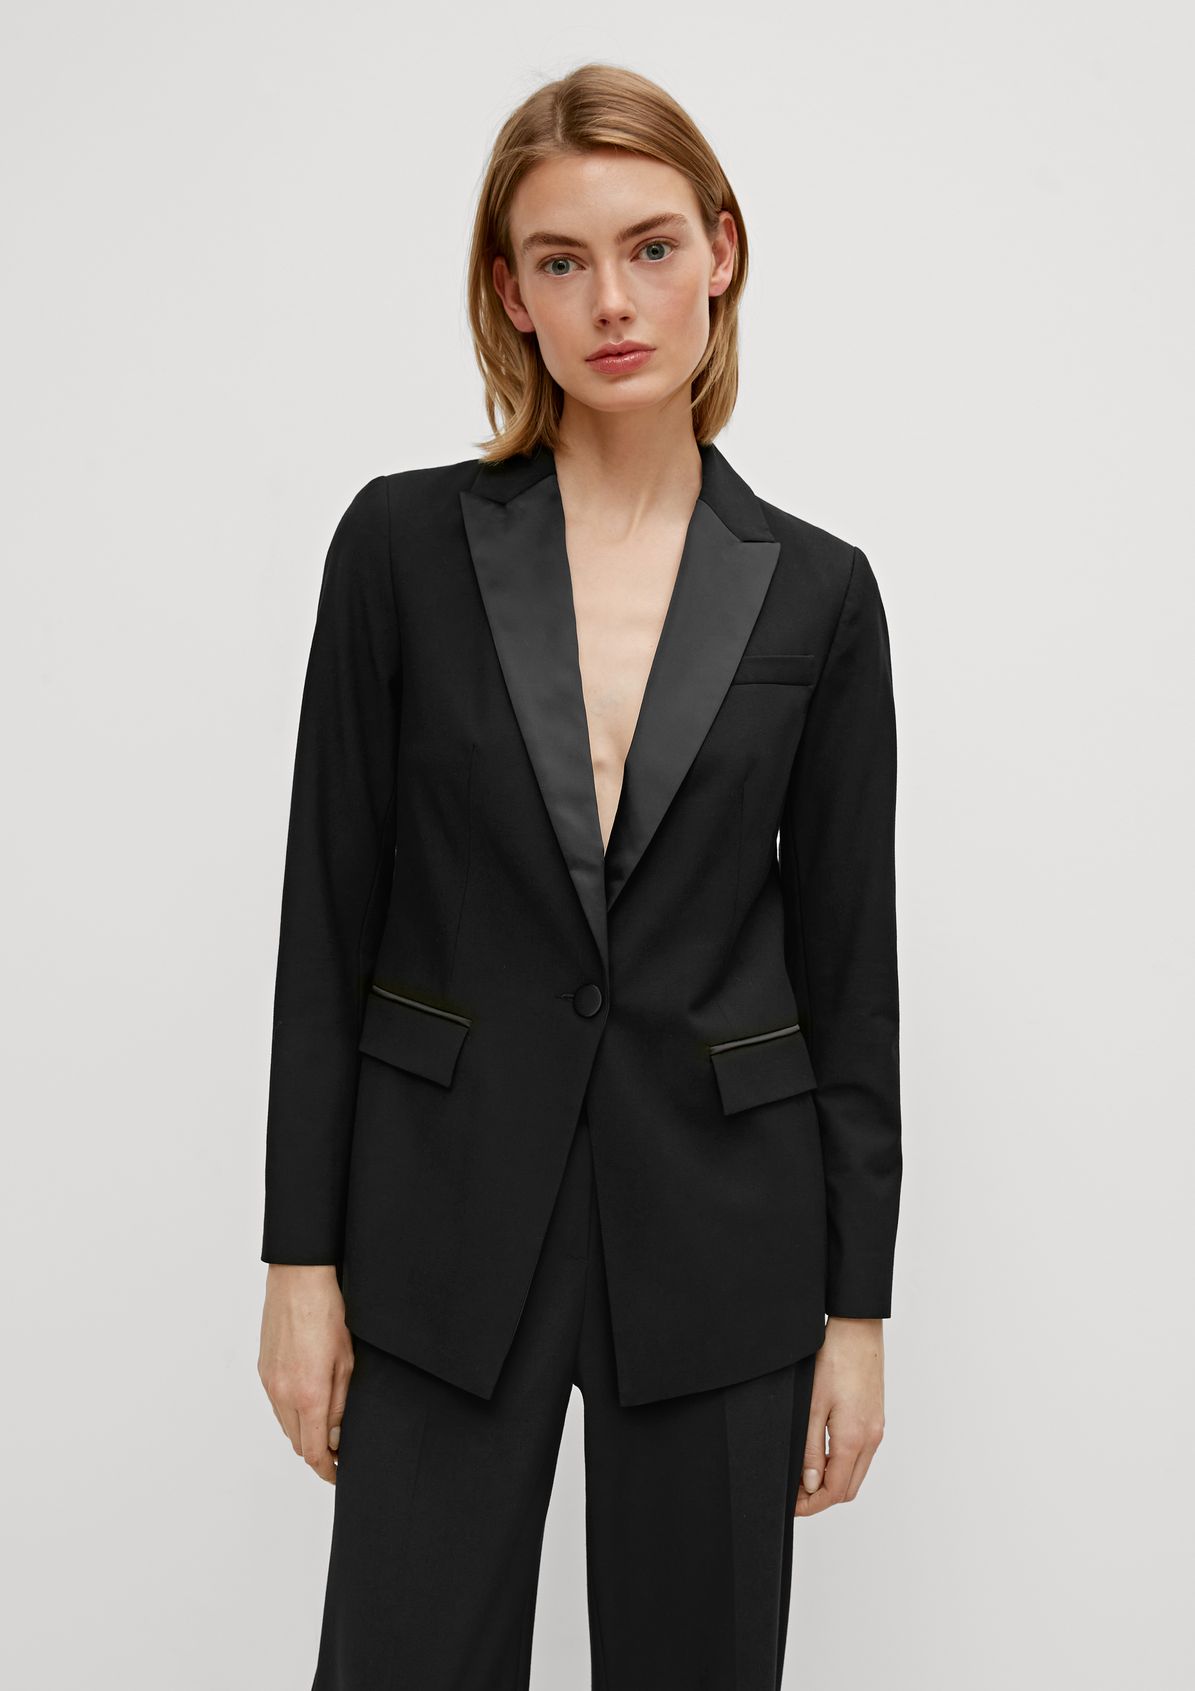 Blazer in a dinner jacket style from comma